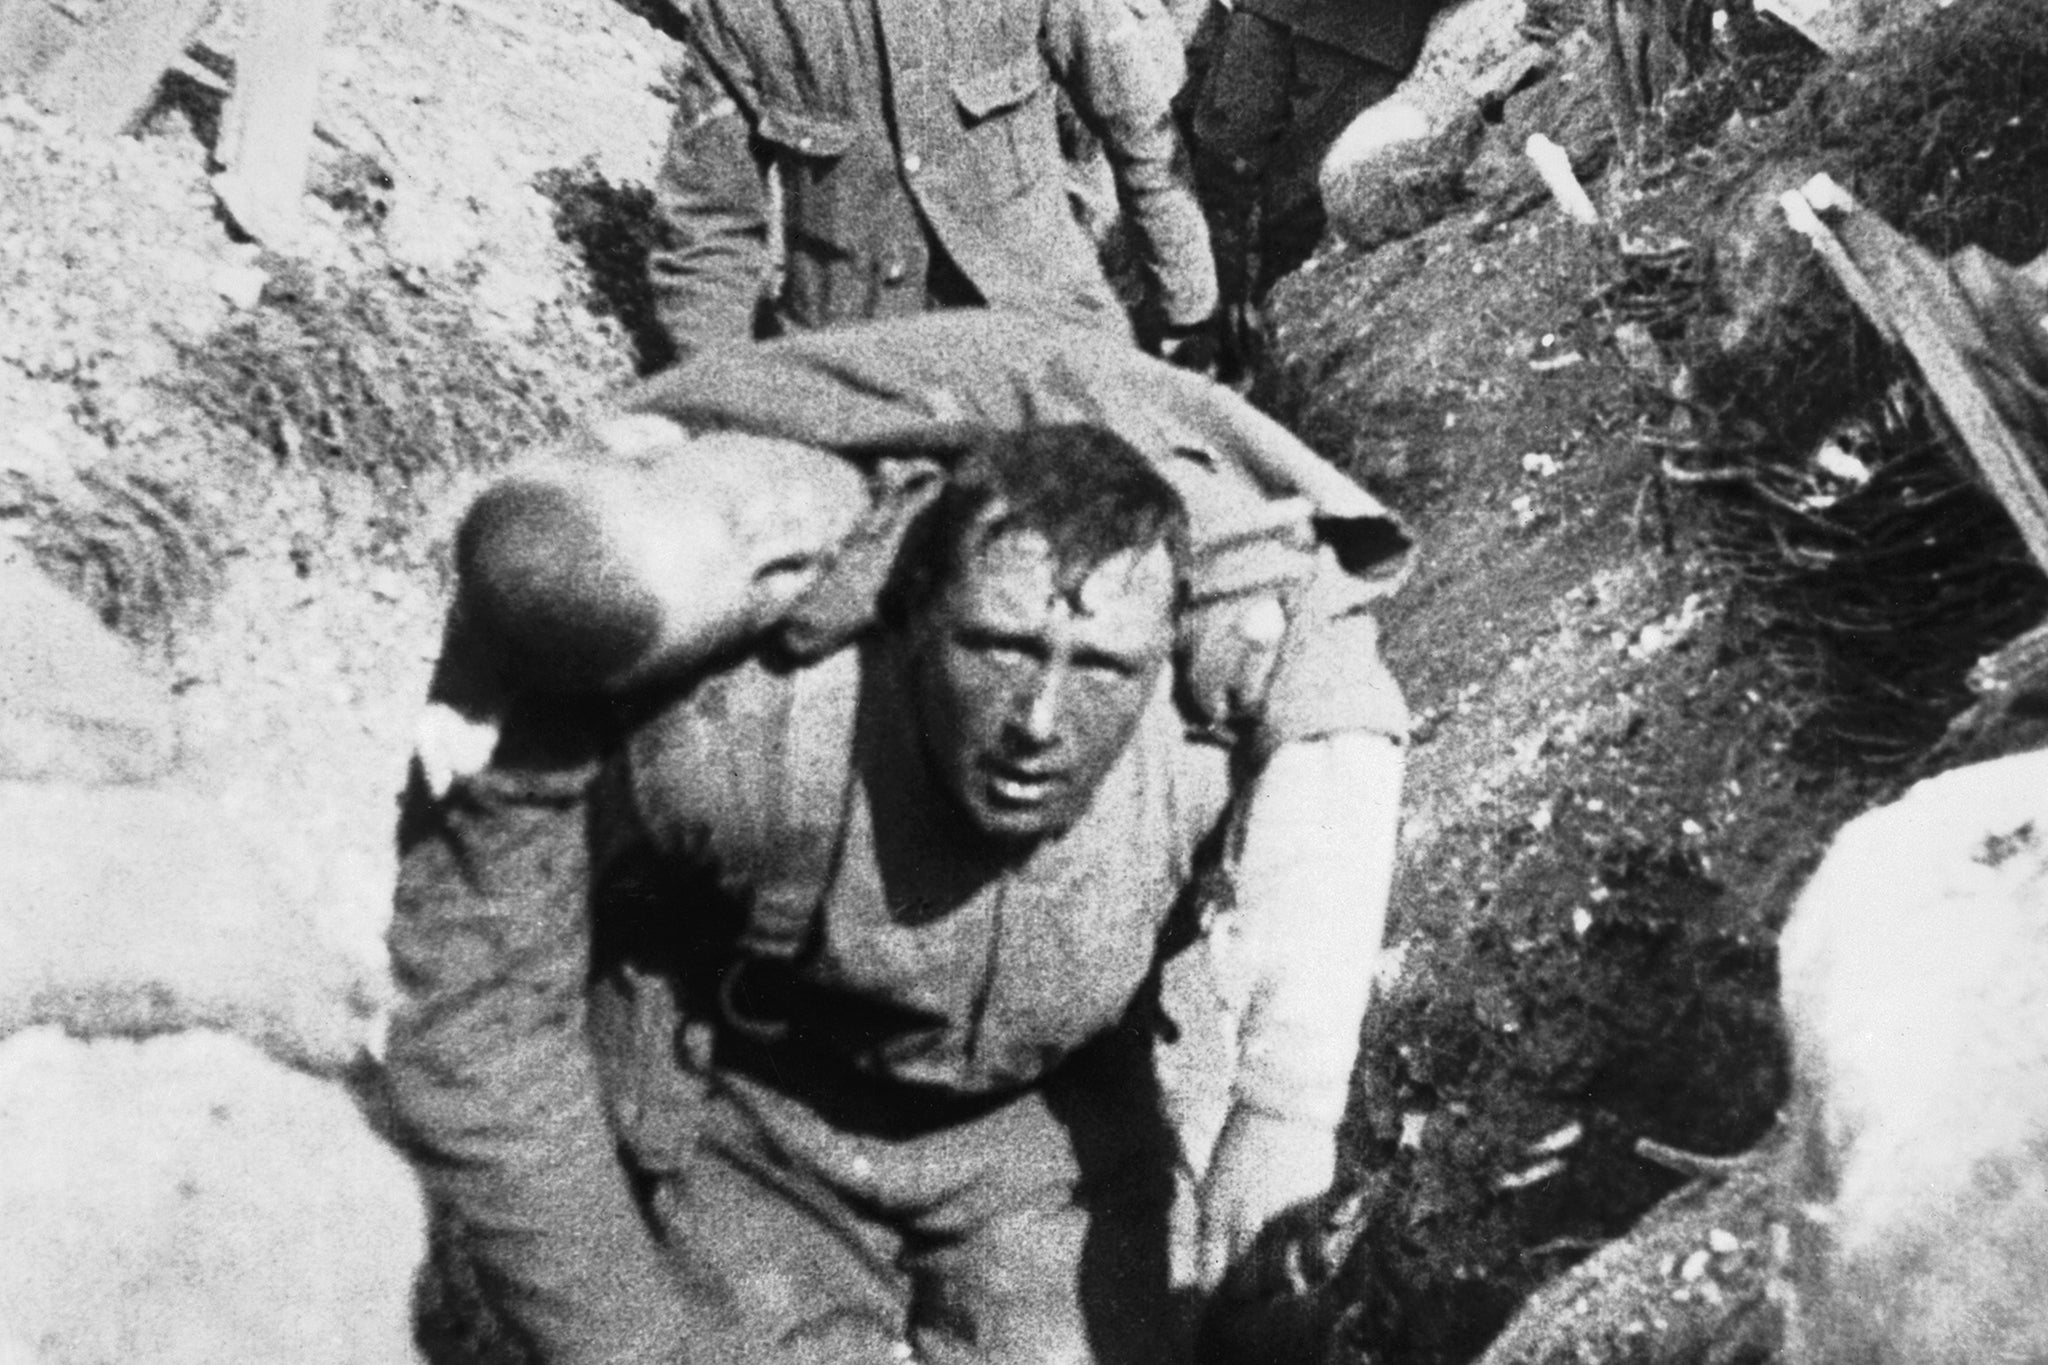 Shell Shock - The Psychological Scars of World War 1 I THE GREAT